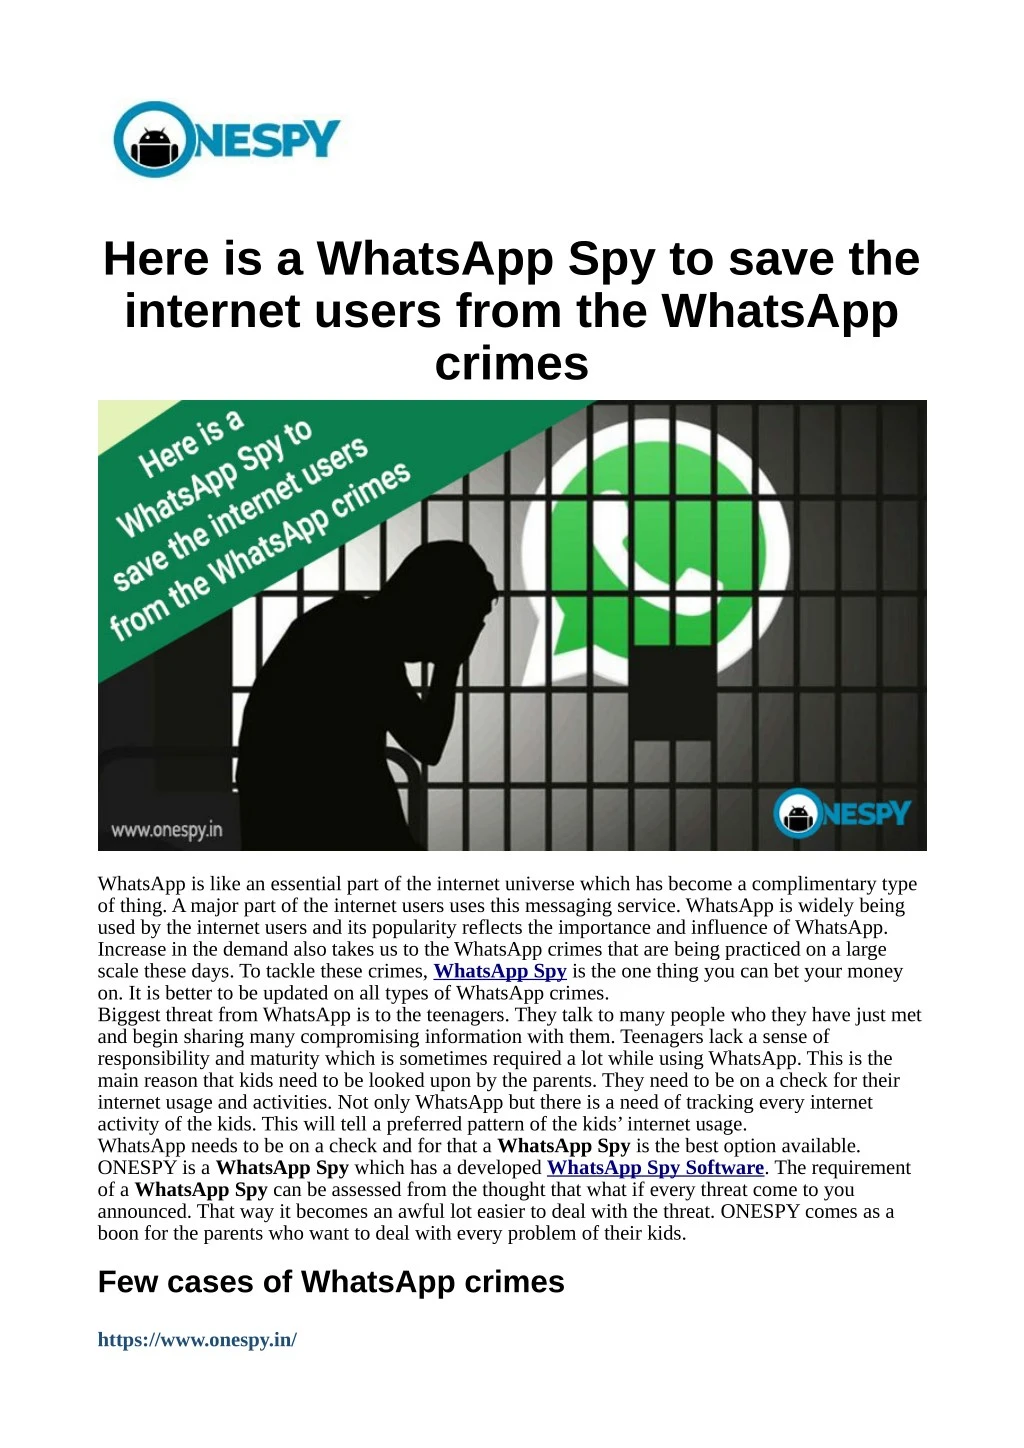 here is a whatsapp spy to save the internet users